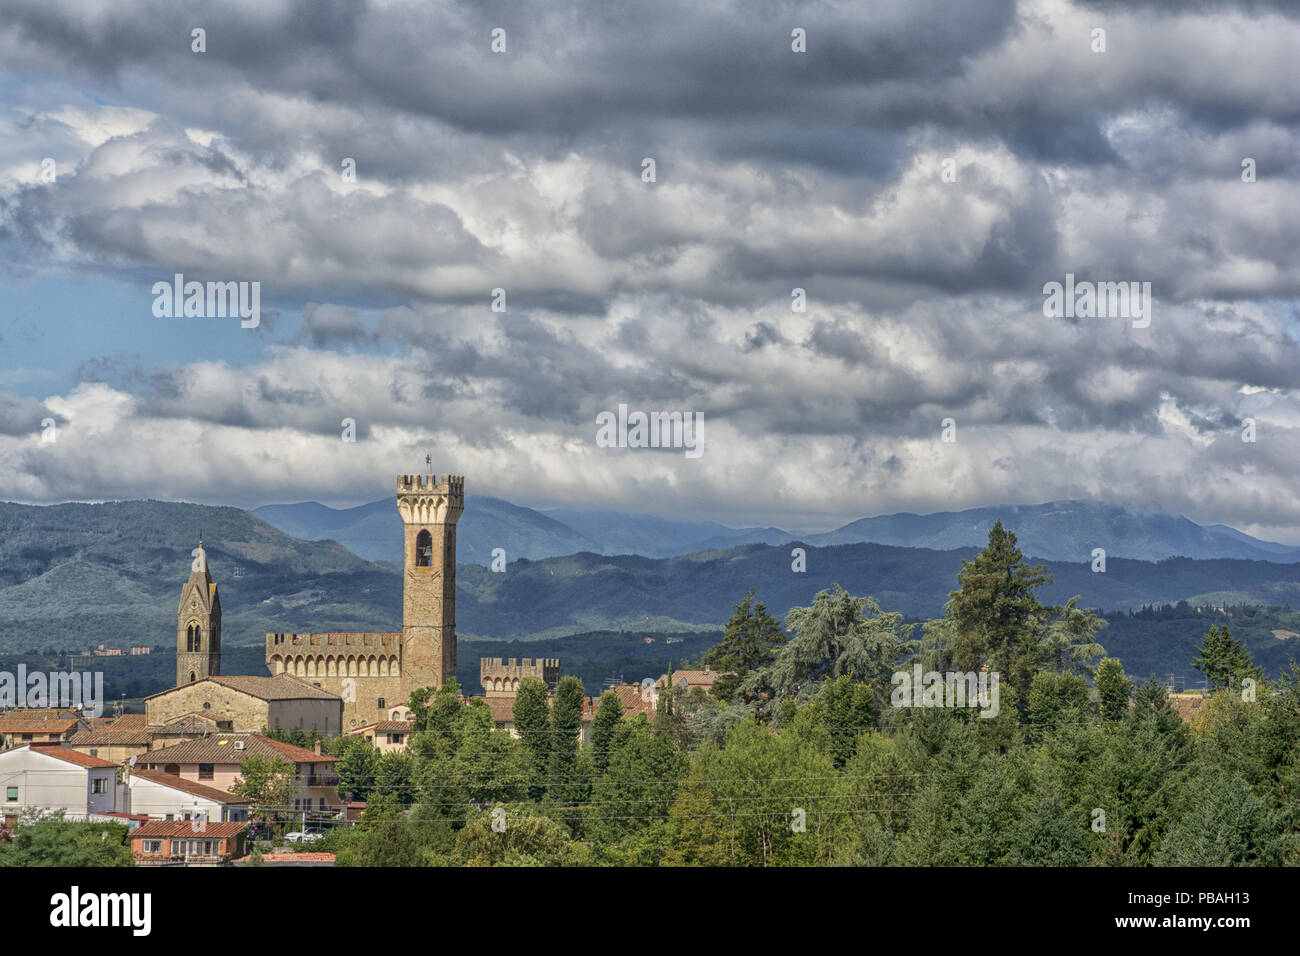 THE ANCIENT CASTLE - VIEW OF PANORAMIC Stock Photo